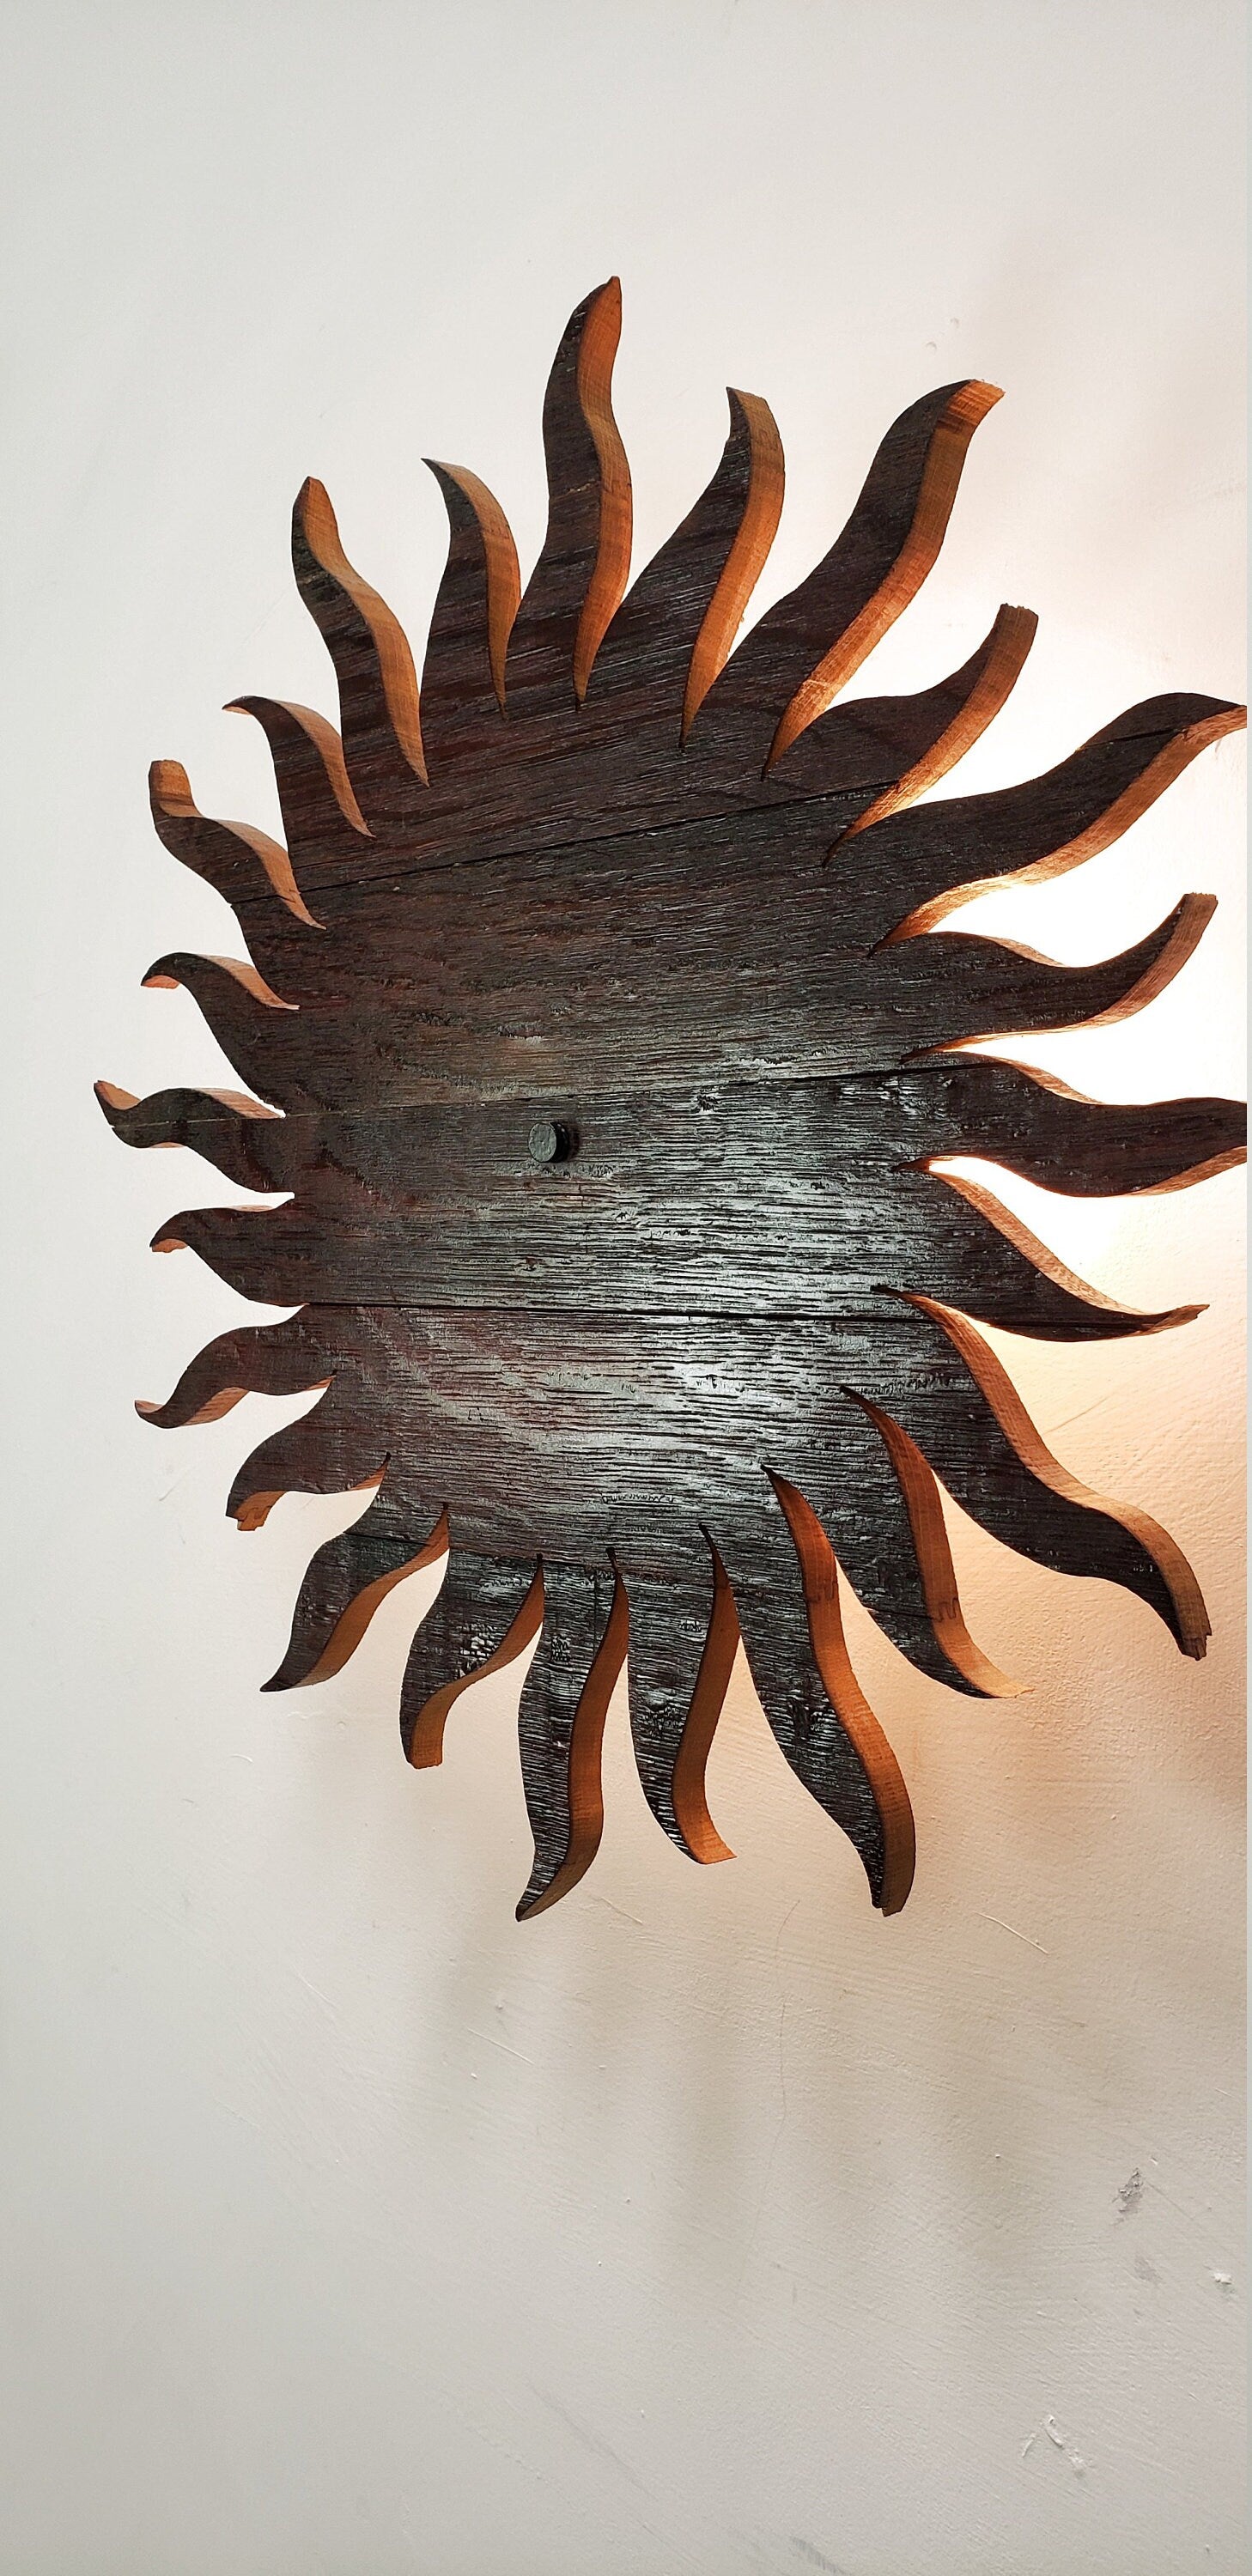 Sun Wine Barrel Wall Sconce - Pelor - Made from retired CA wine barrels. 100% Recycled!